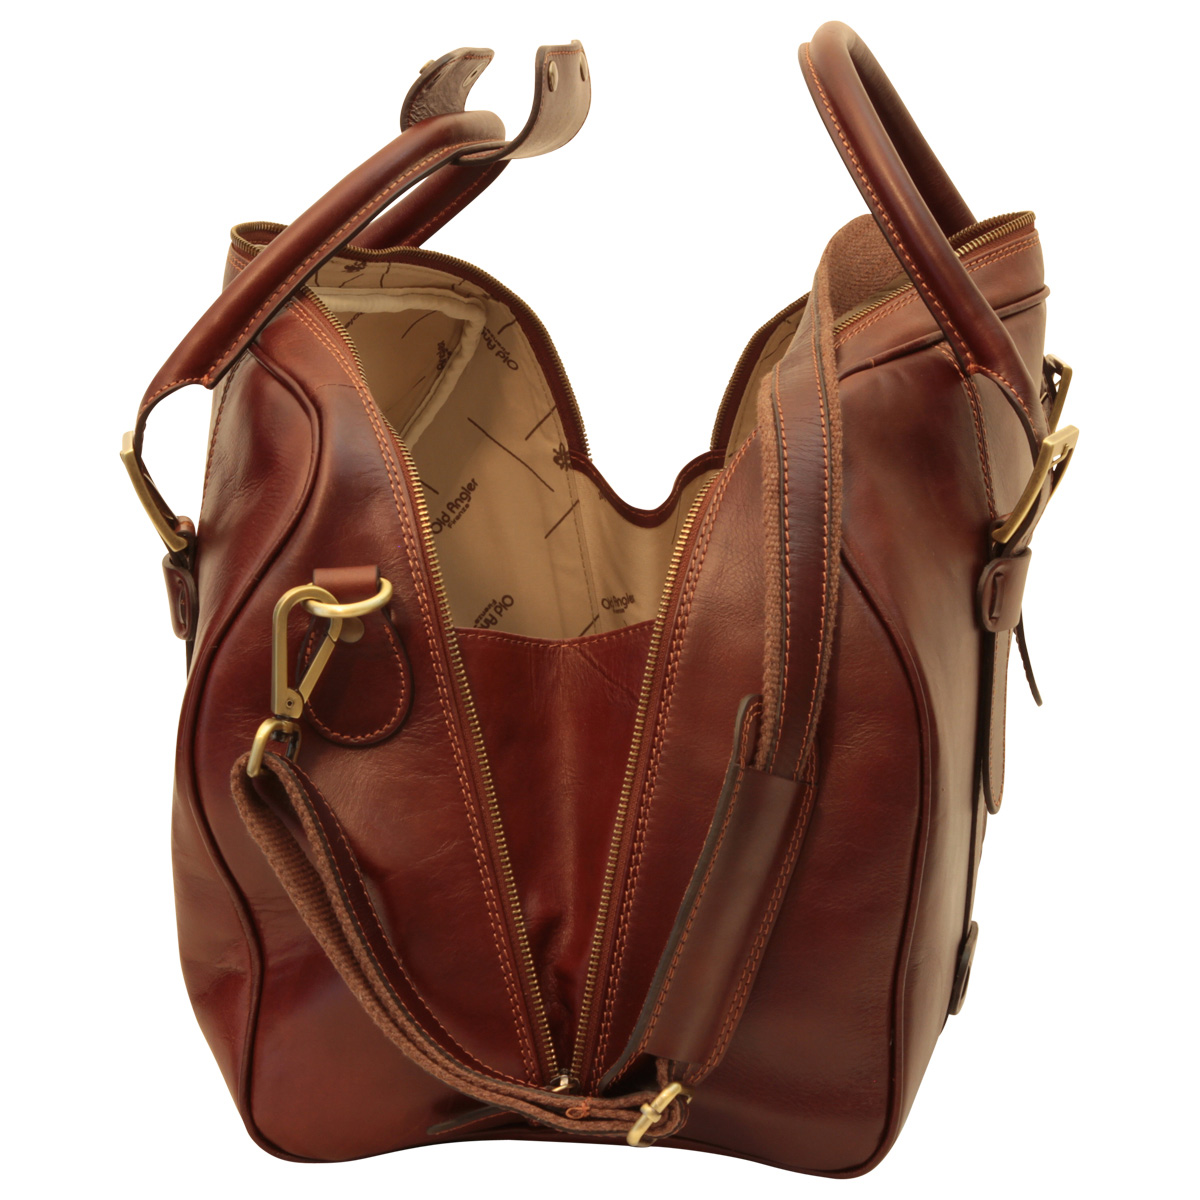 Cowhide leather duffel bag - Brown | 410889MA | EURO | Old Angler Firenze